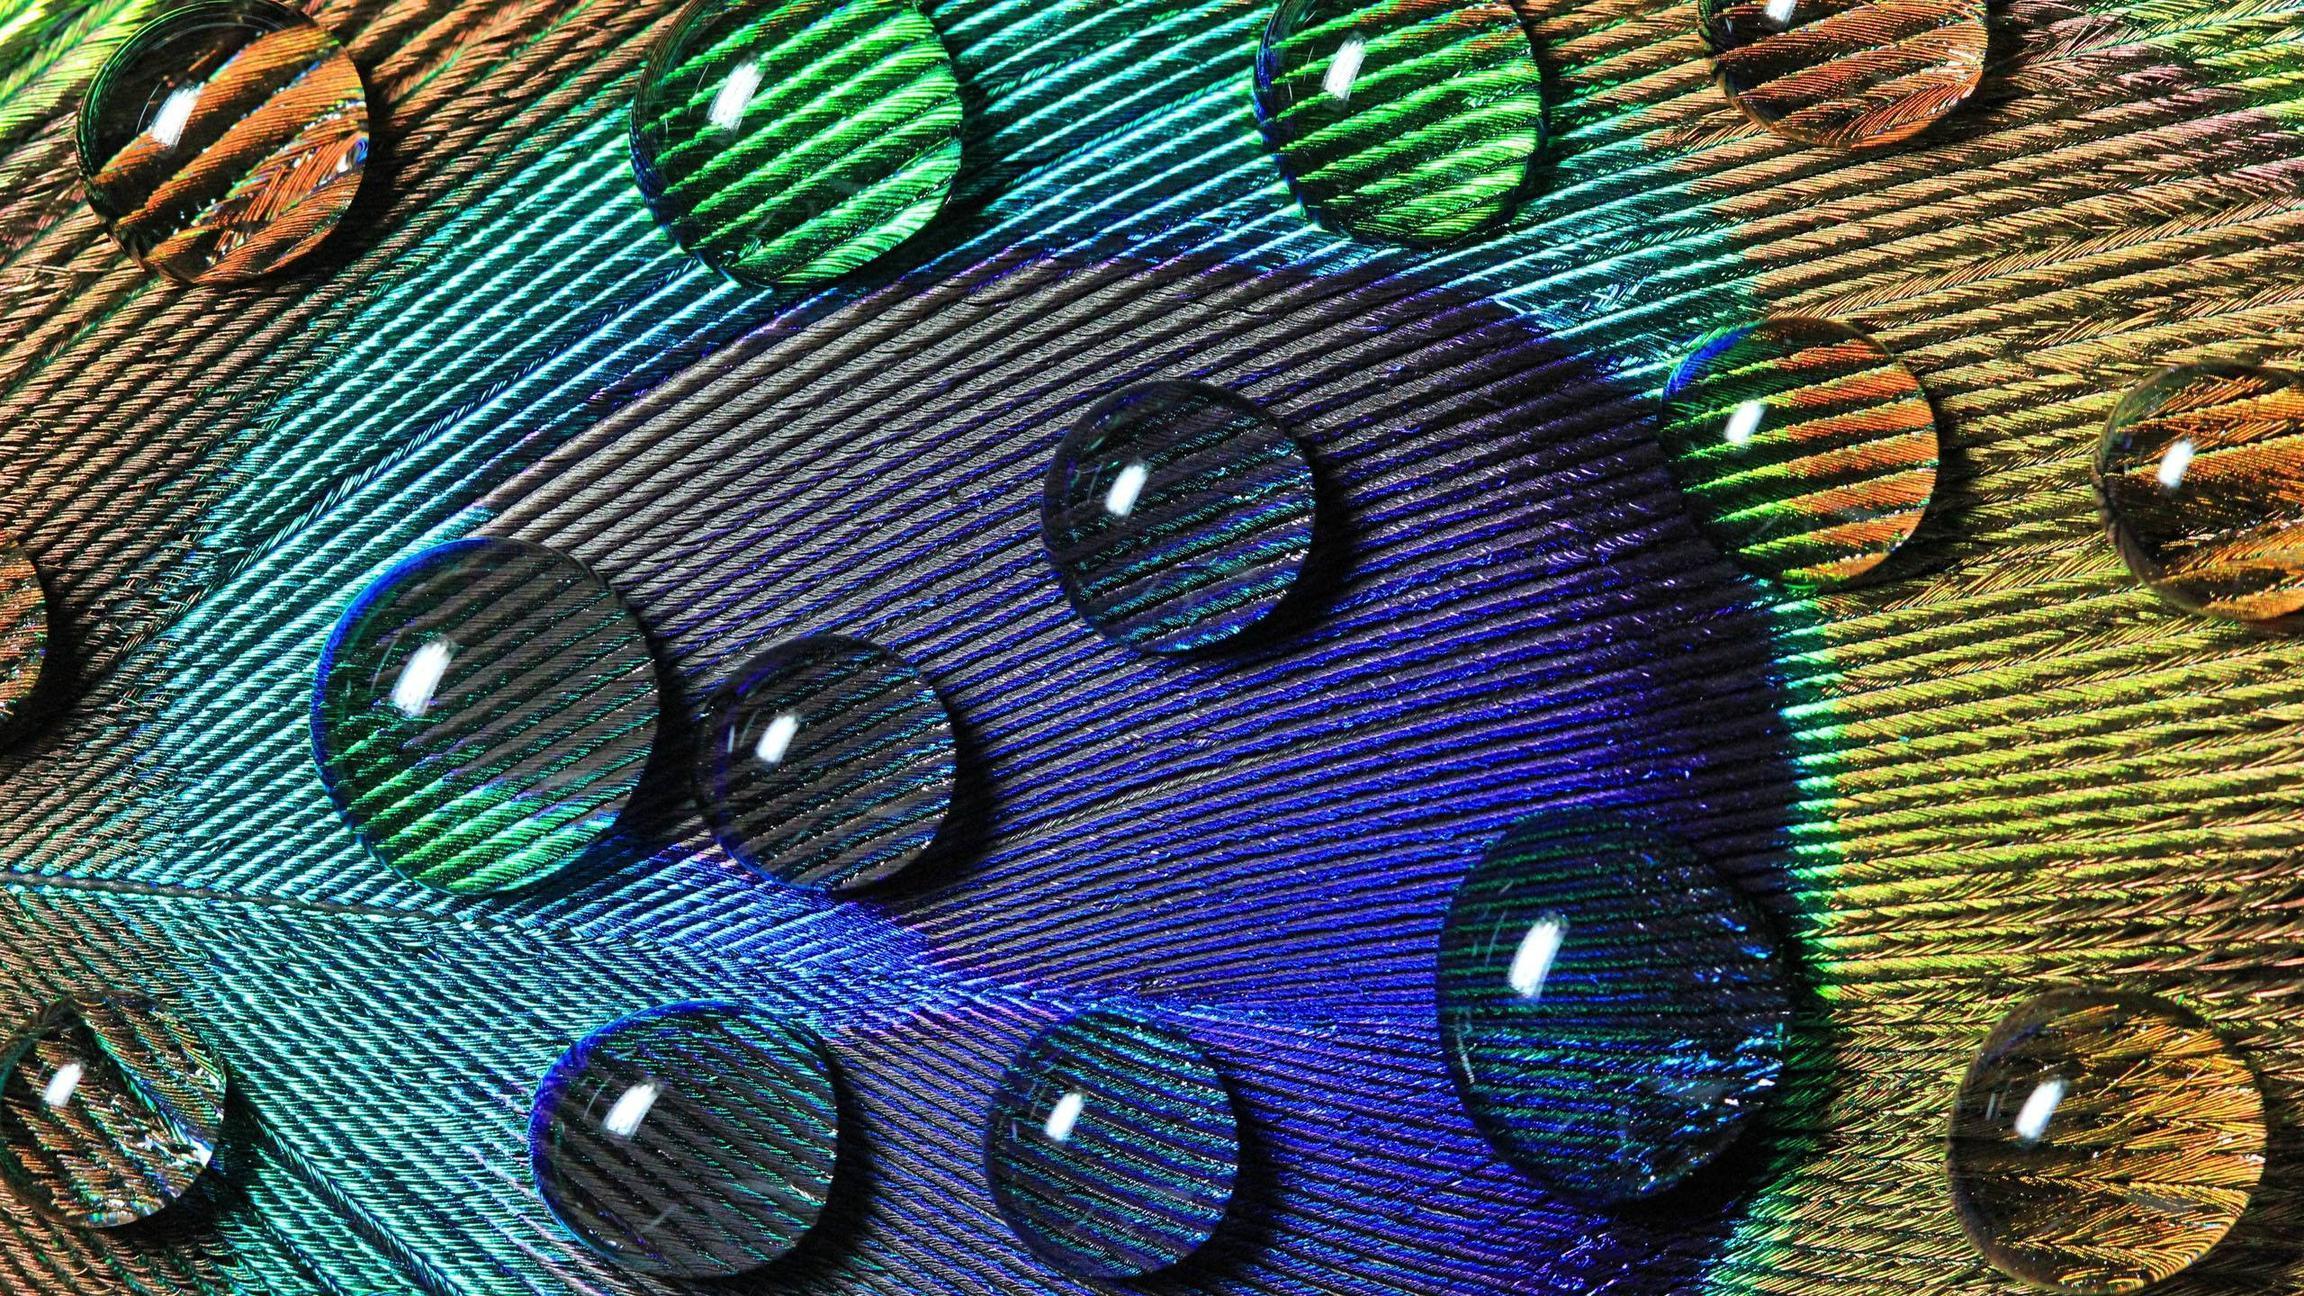 Water Drops On Peacock Feather Wallpaper Wide or HD. Photography